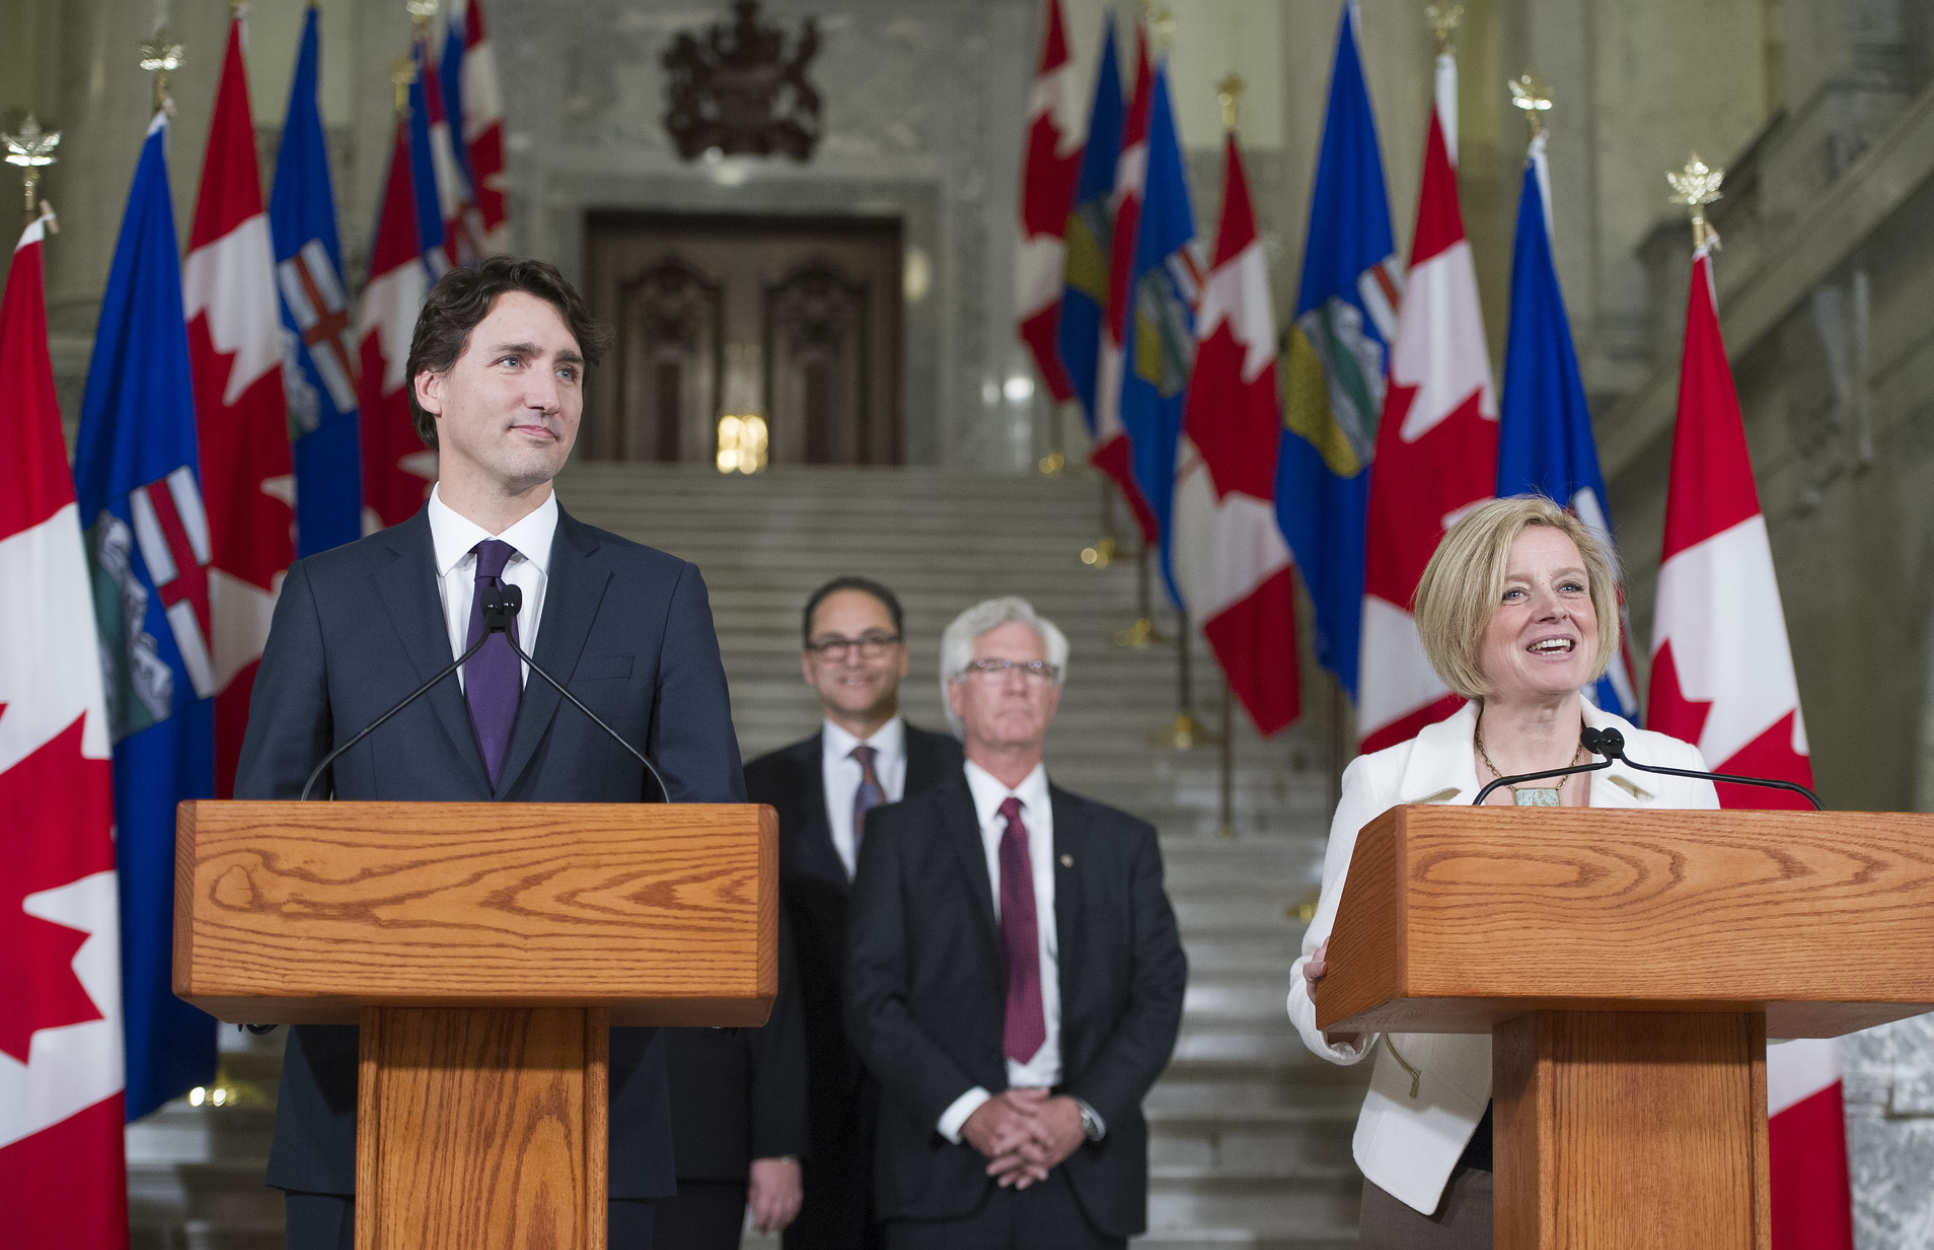 Premier Rachel Notley and Prime Minister Justin Trudeau speaking in Edmonton during the Prime Minister's visit to Alberta in 2016. ((c)Chris Schwarz/Government of Alberta)